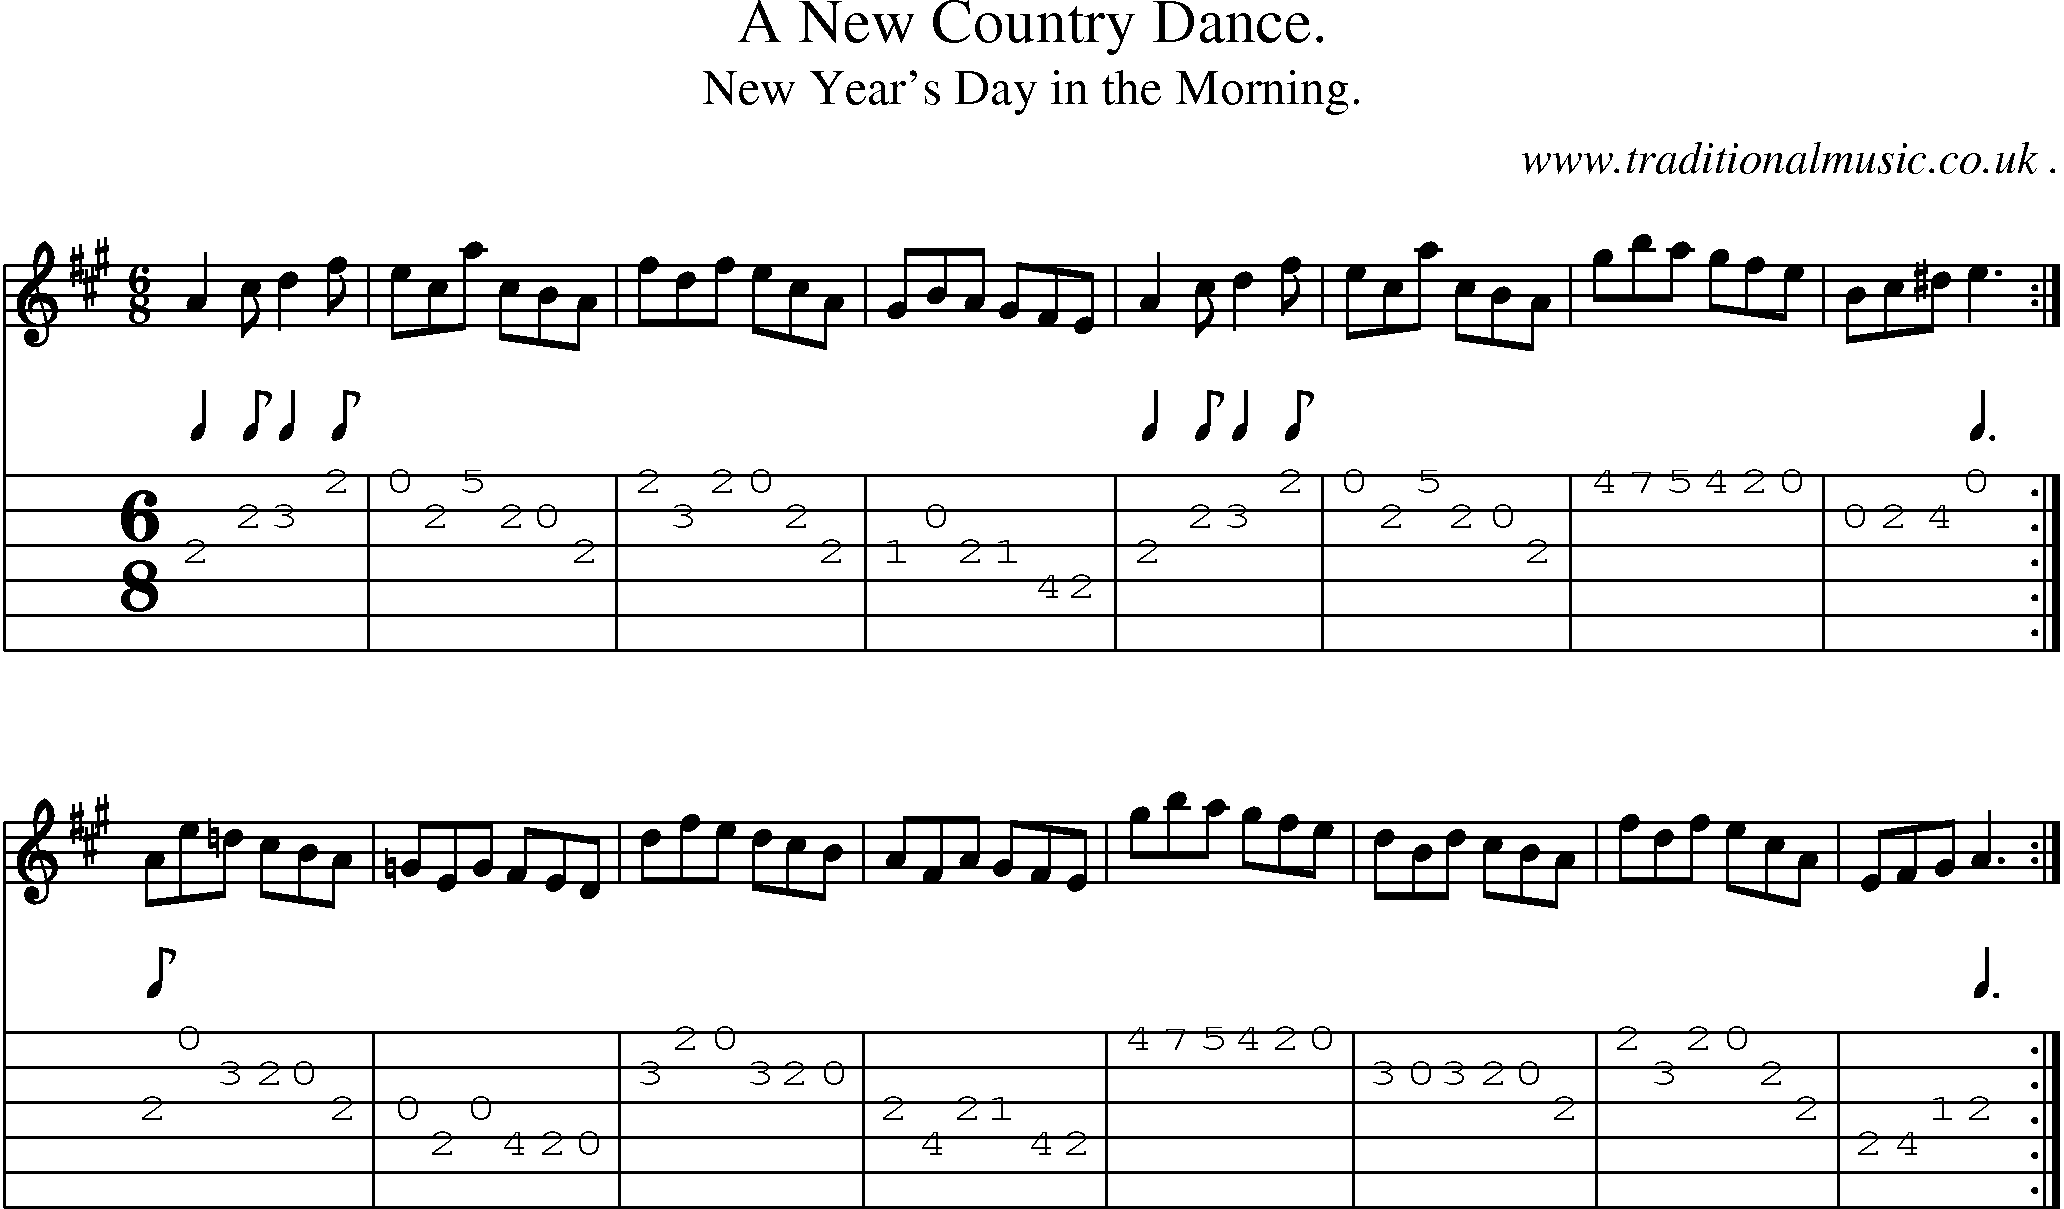 Sheet-music  score, Chords and Guitar Tabs for A New Country Dance